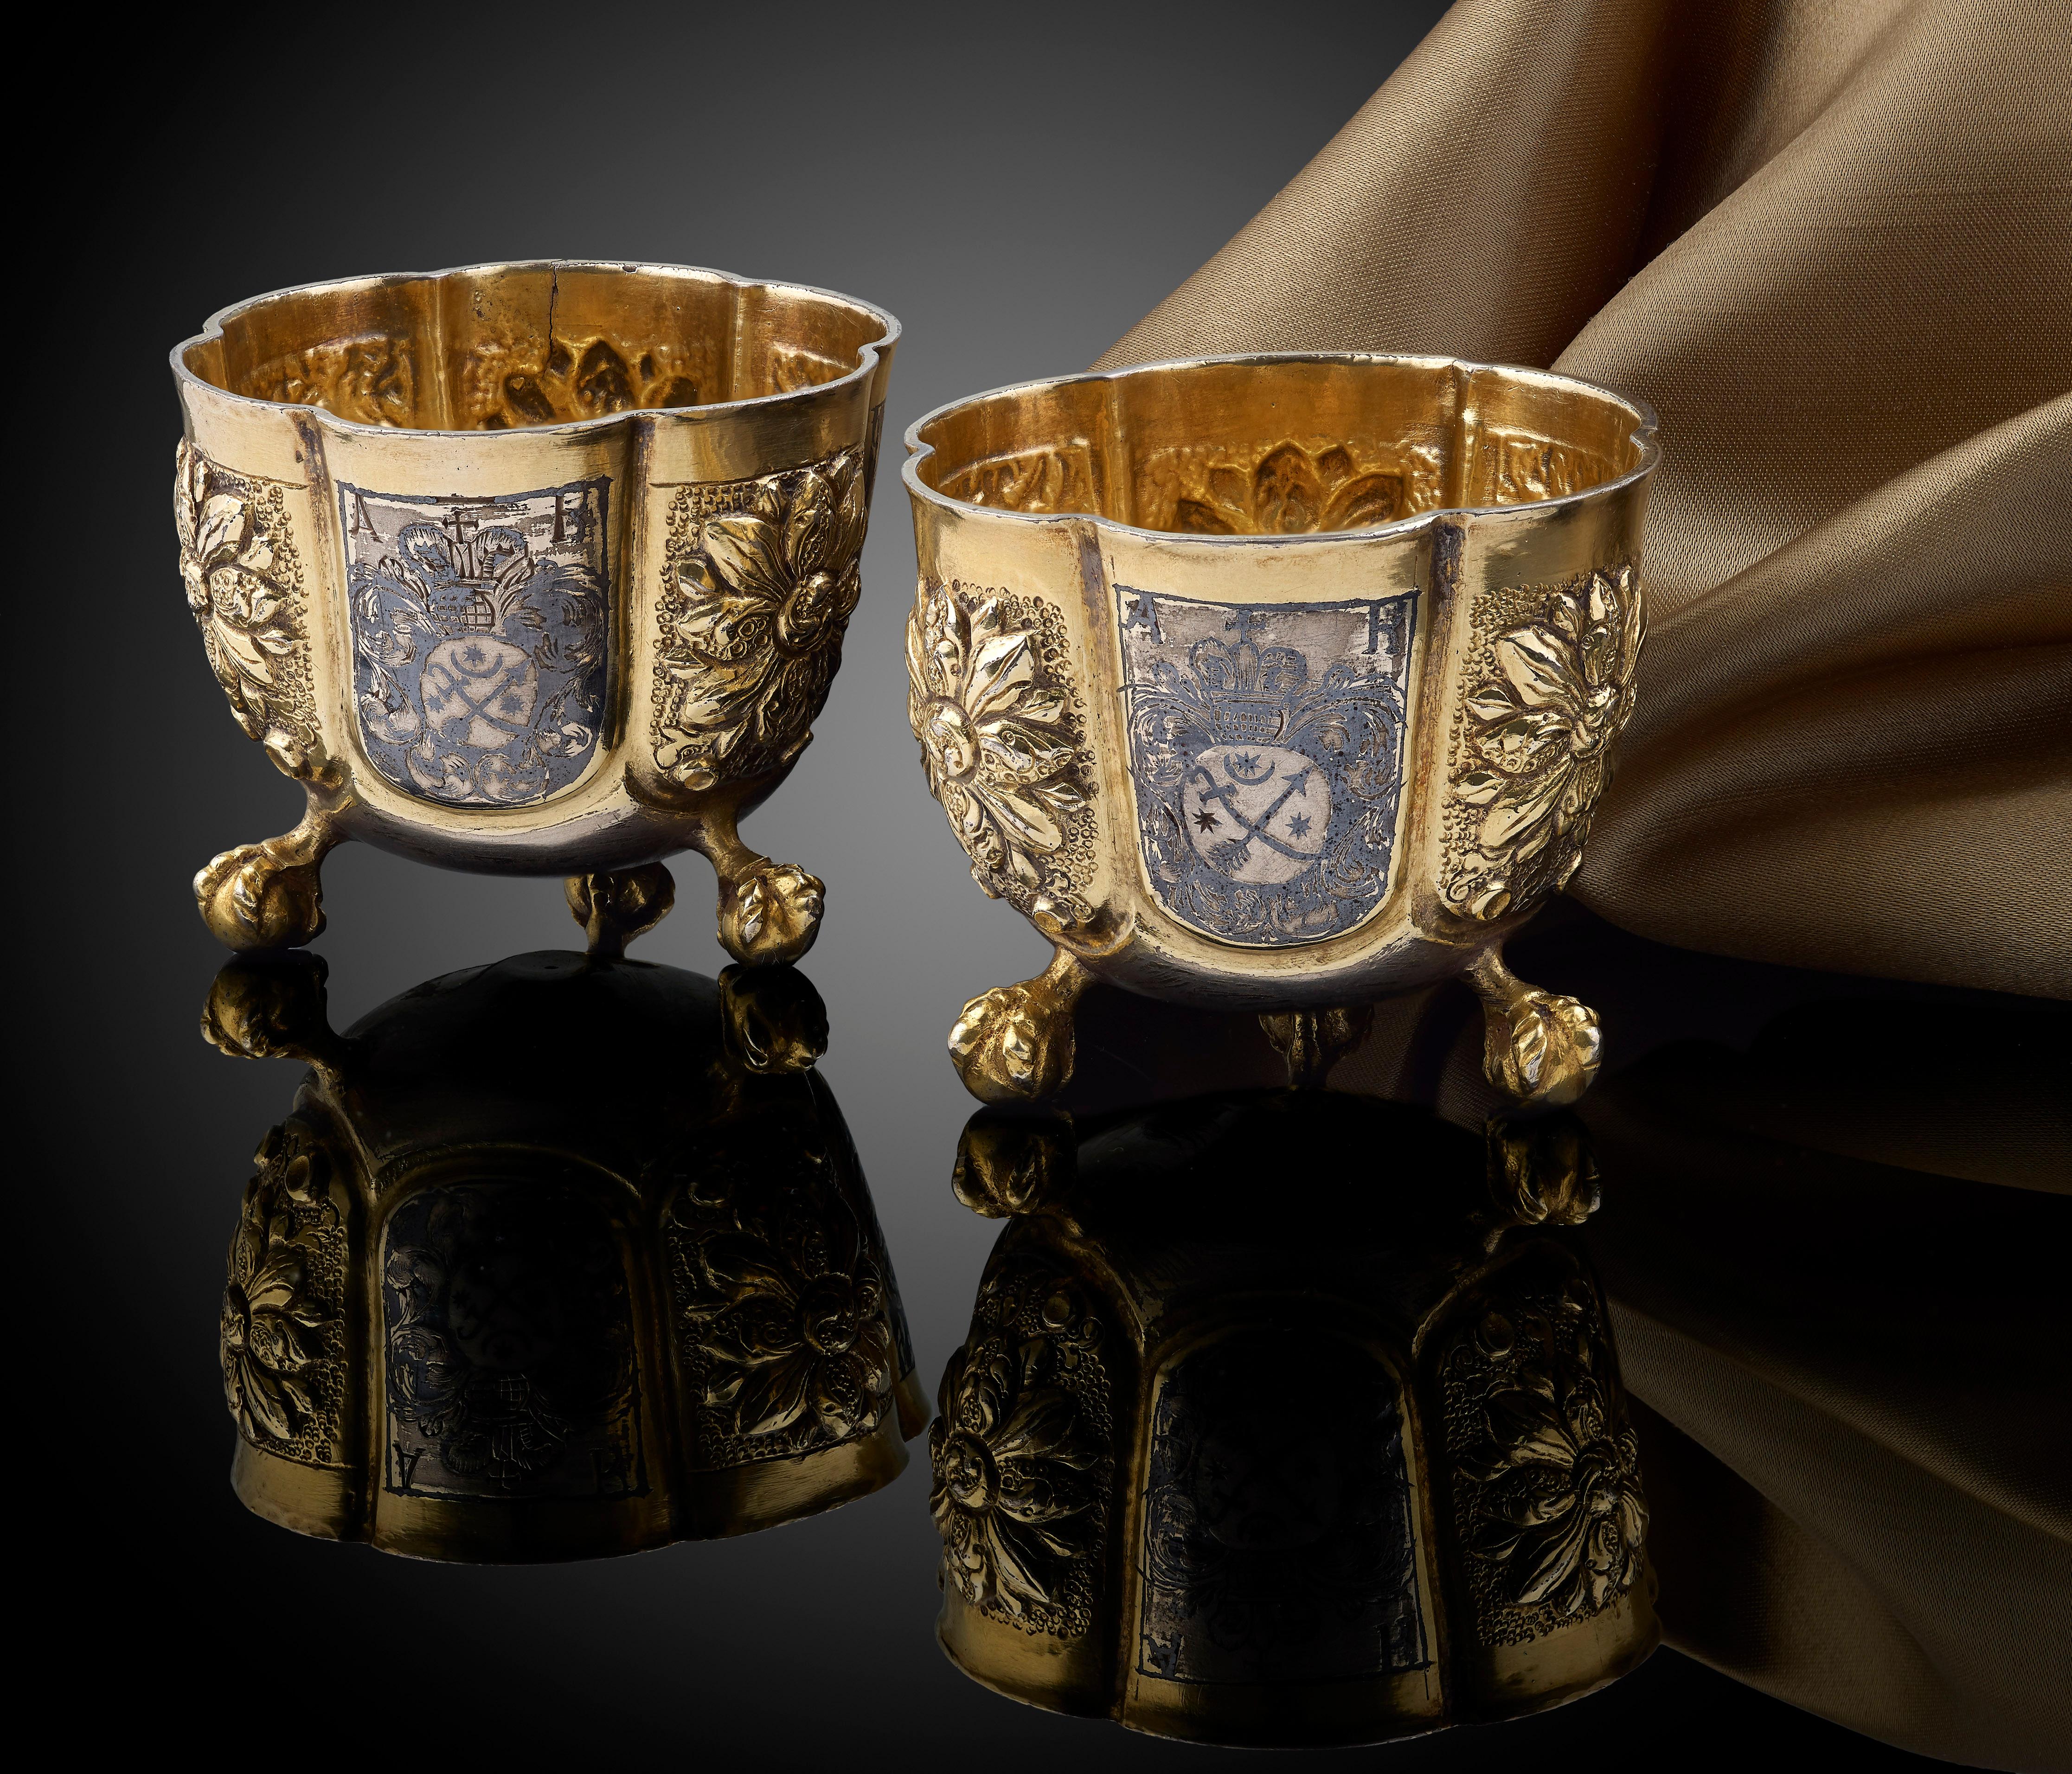 A fine and rare pair of Russian silver Vodka cups, circa 1680–1690, probably Moscow; gilded and with Niello work decorative panels; each stand on three little ball feet; inside each cup is a stamped collector's mark (which are probably 18th century